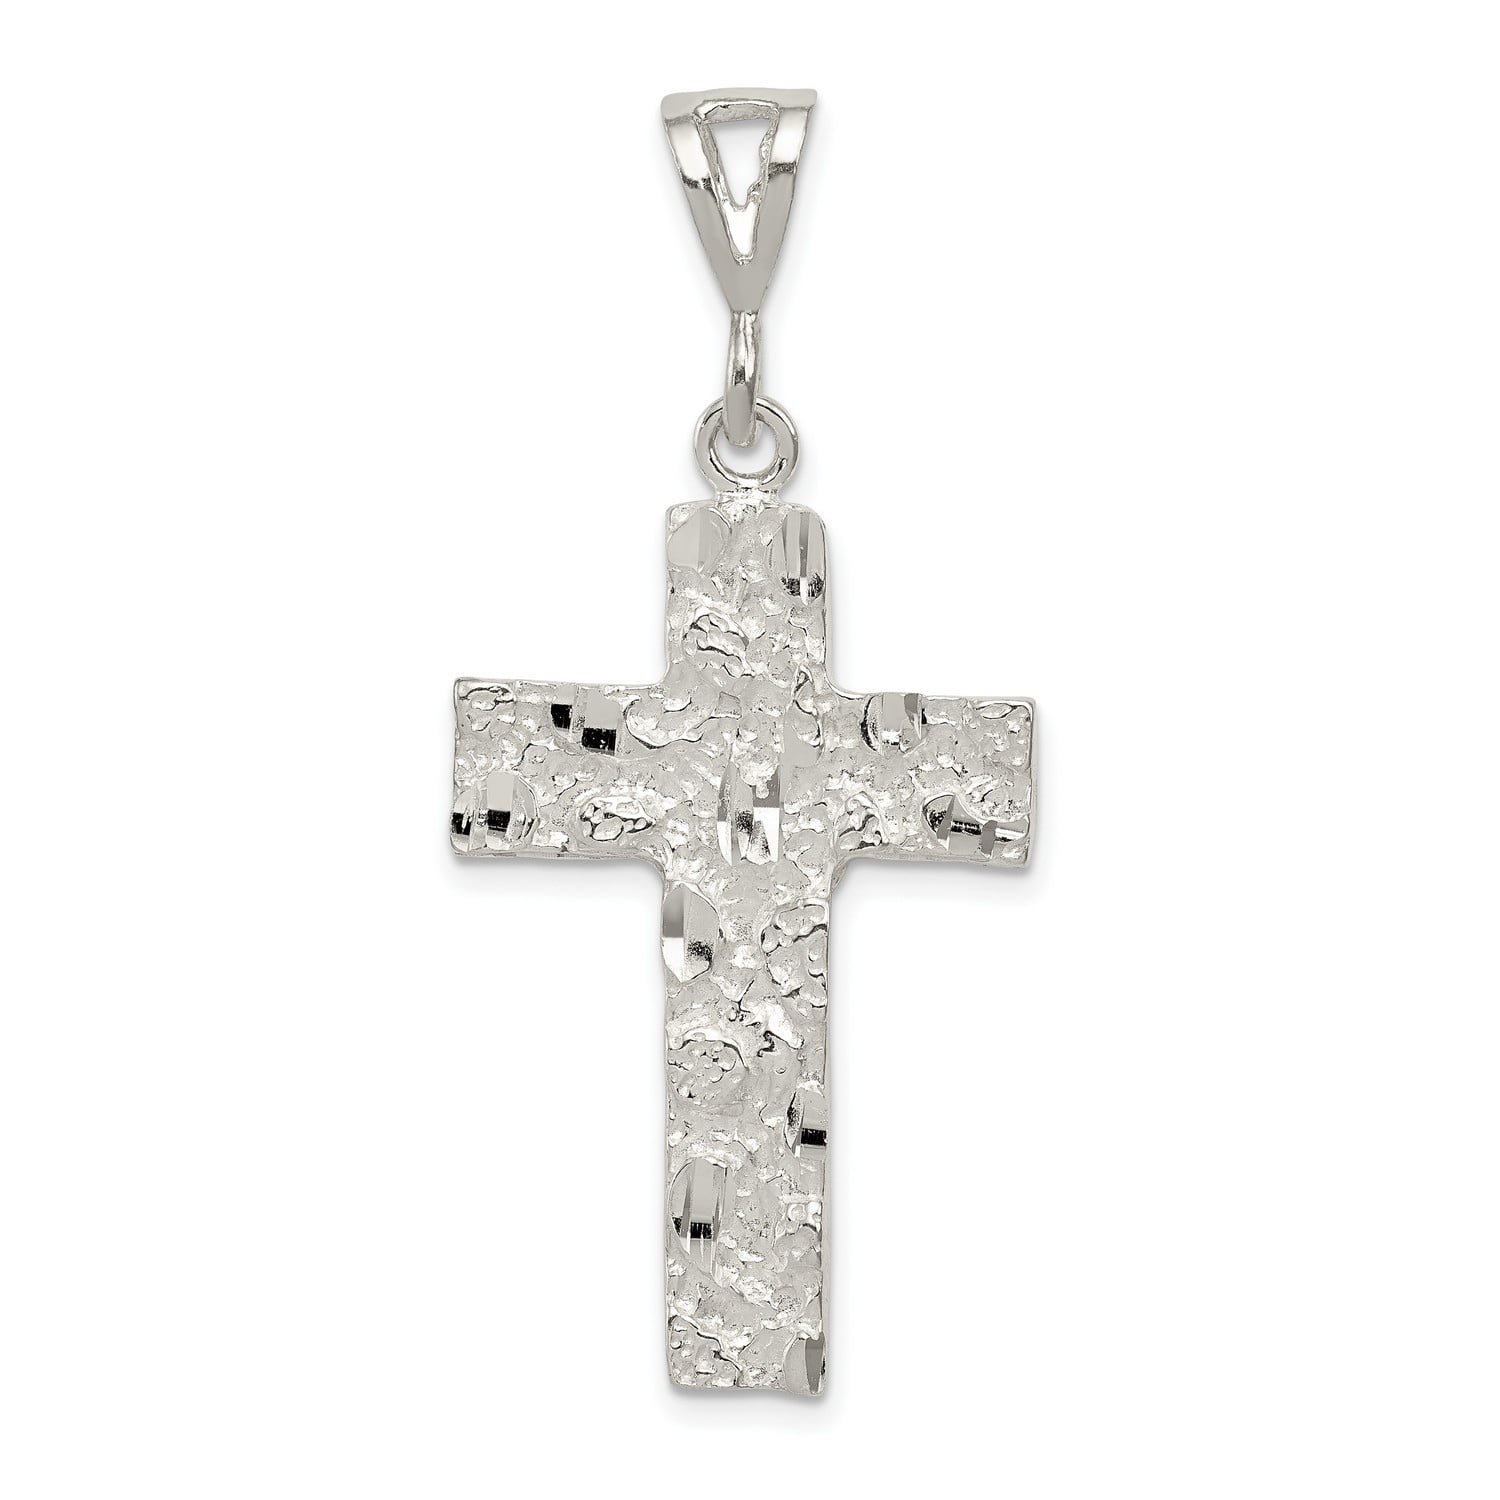 INRI Crucifix Pendant Sterling Silver Themed Jewelry Pendants & Charms Solid 22 mm 40 mm